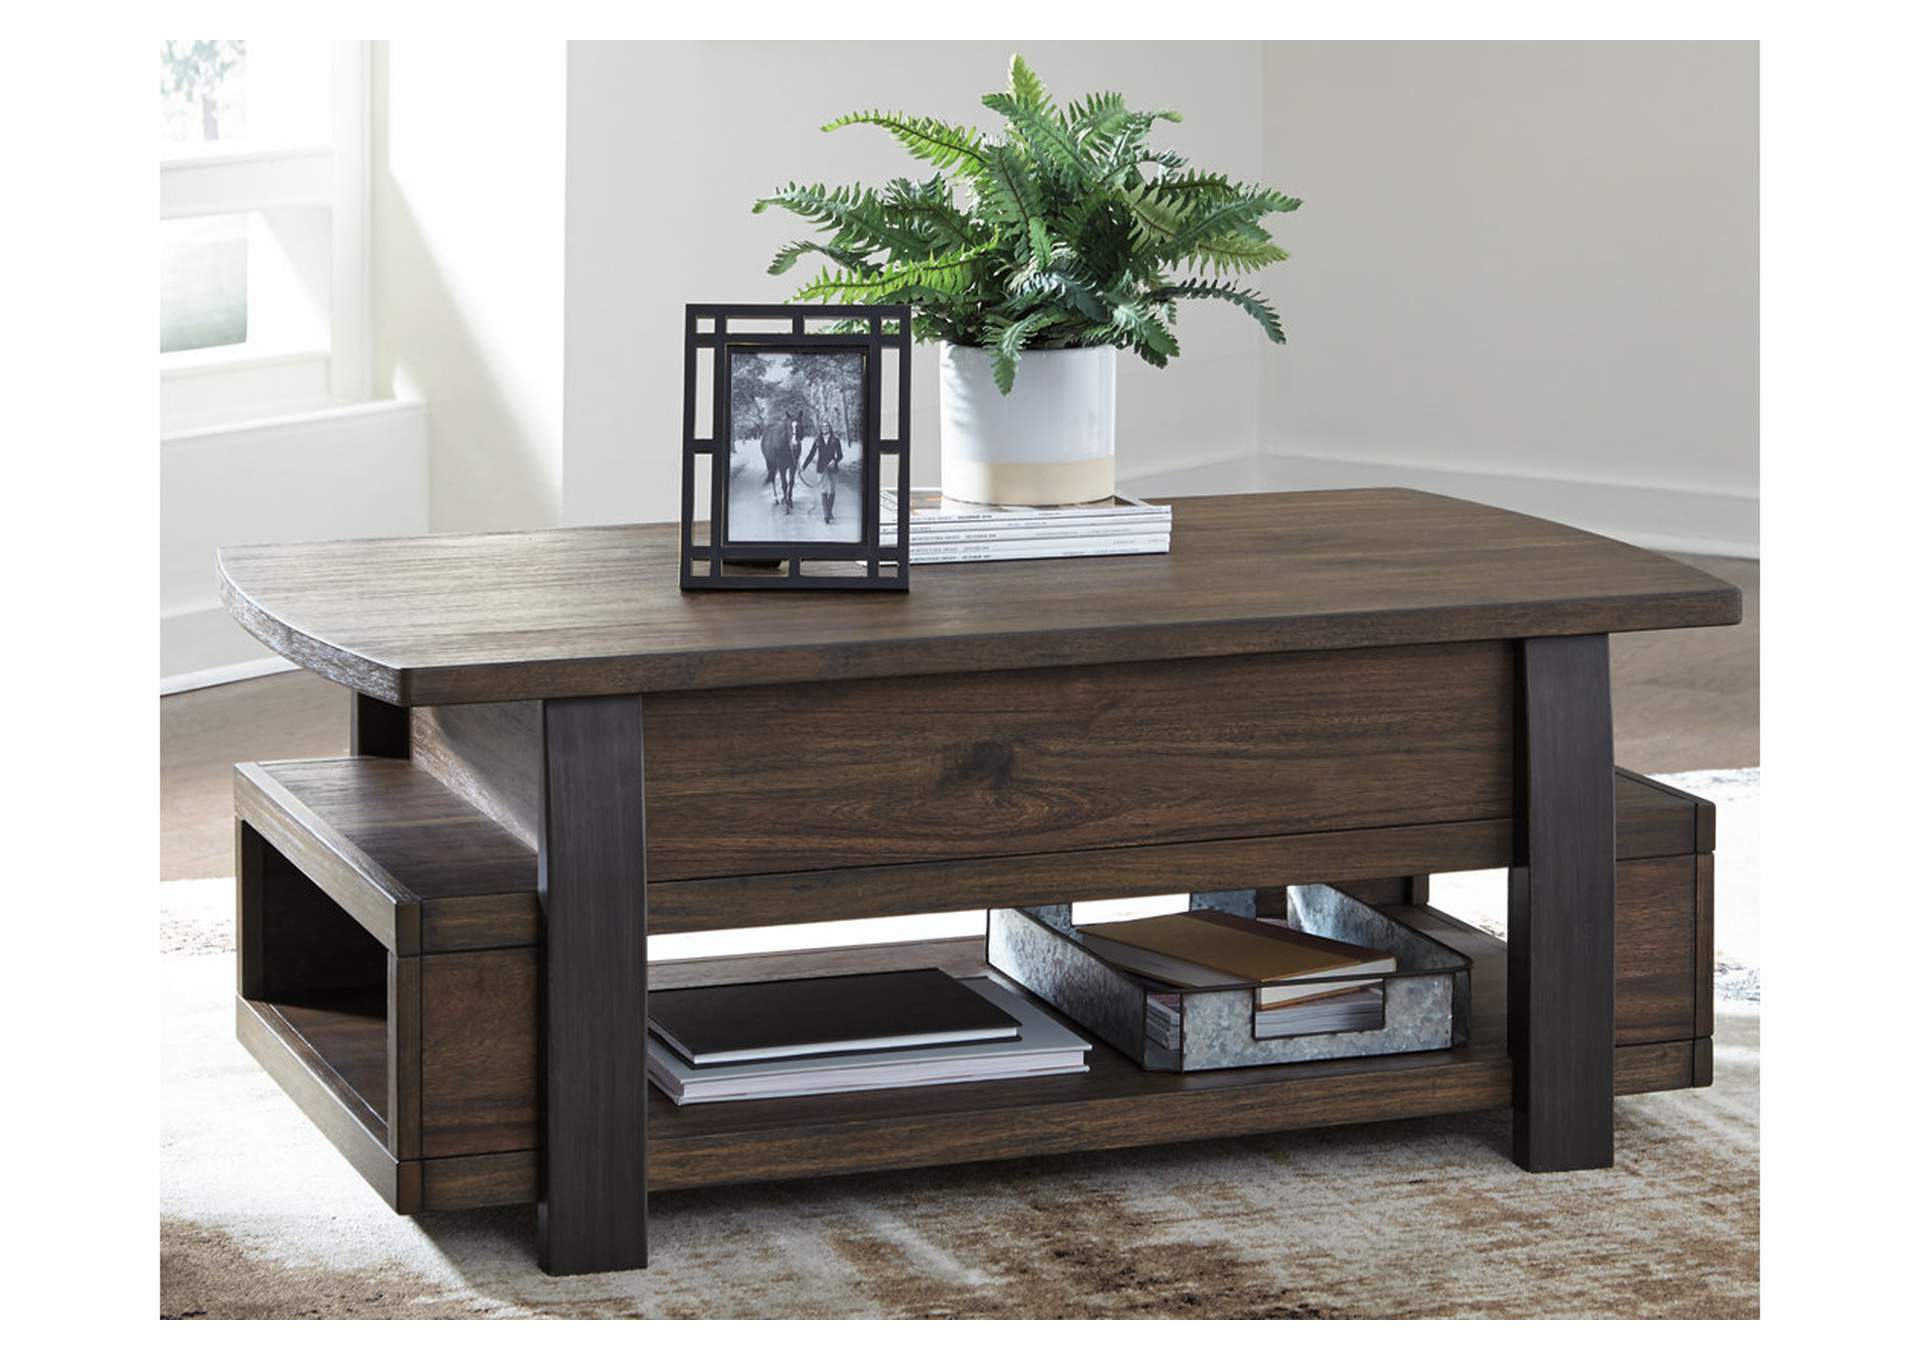 Vailbry Coffee Table with Lift Top,Direct To Consumer Express